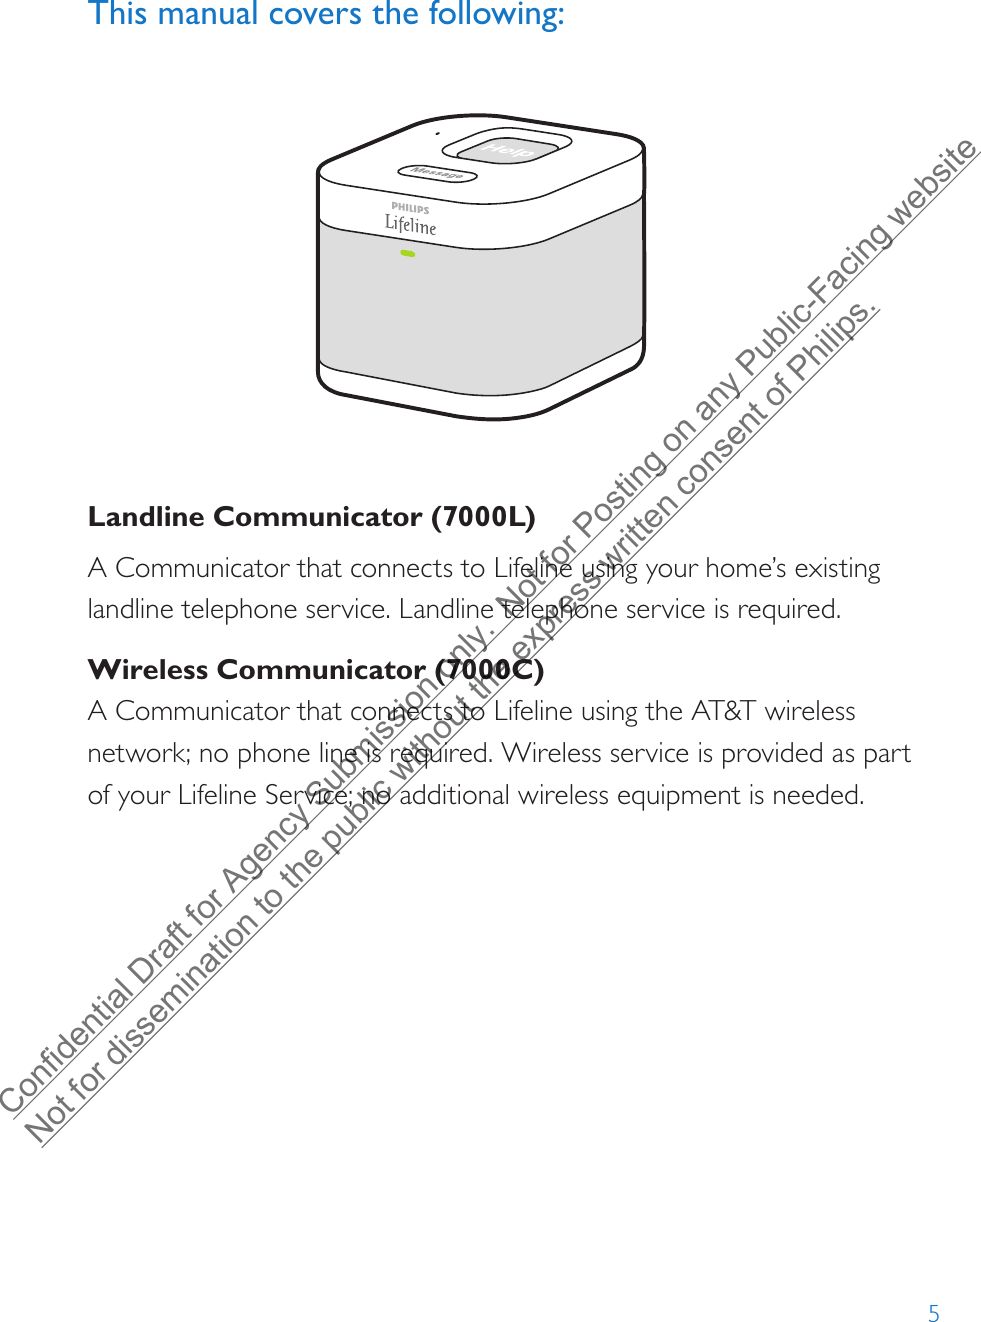 5This manual covers the following: Landline Communicator (7000L)A Communicator that connects to Lifeline using your home’s existing landline telephone service. Landline telephone service is required.Wireless Communicator (7000C)A Communicator that connects to Lifeline using the AT&amp;T wireless network; no phone line is required. Wireless service is provided as part of your Lifeline Service; no additional wireless equipment is needed.Confidential Draft for Agency Submission only.  Not for Posting on any Public-Facing website Not for dissemination to the public without the express written consent of Philips.  